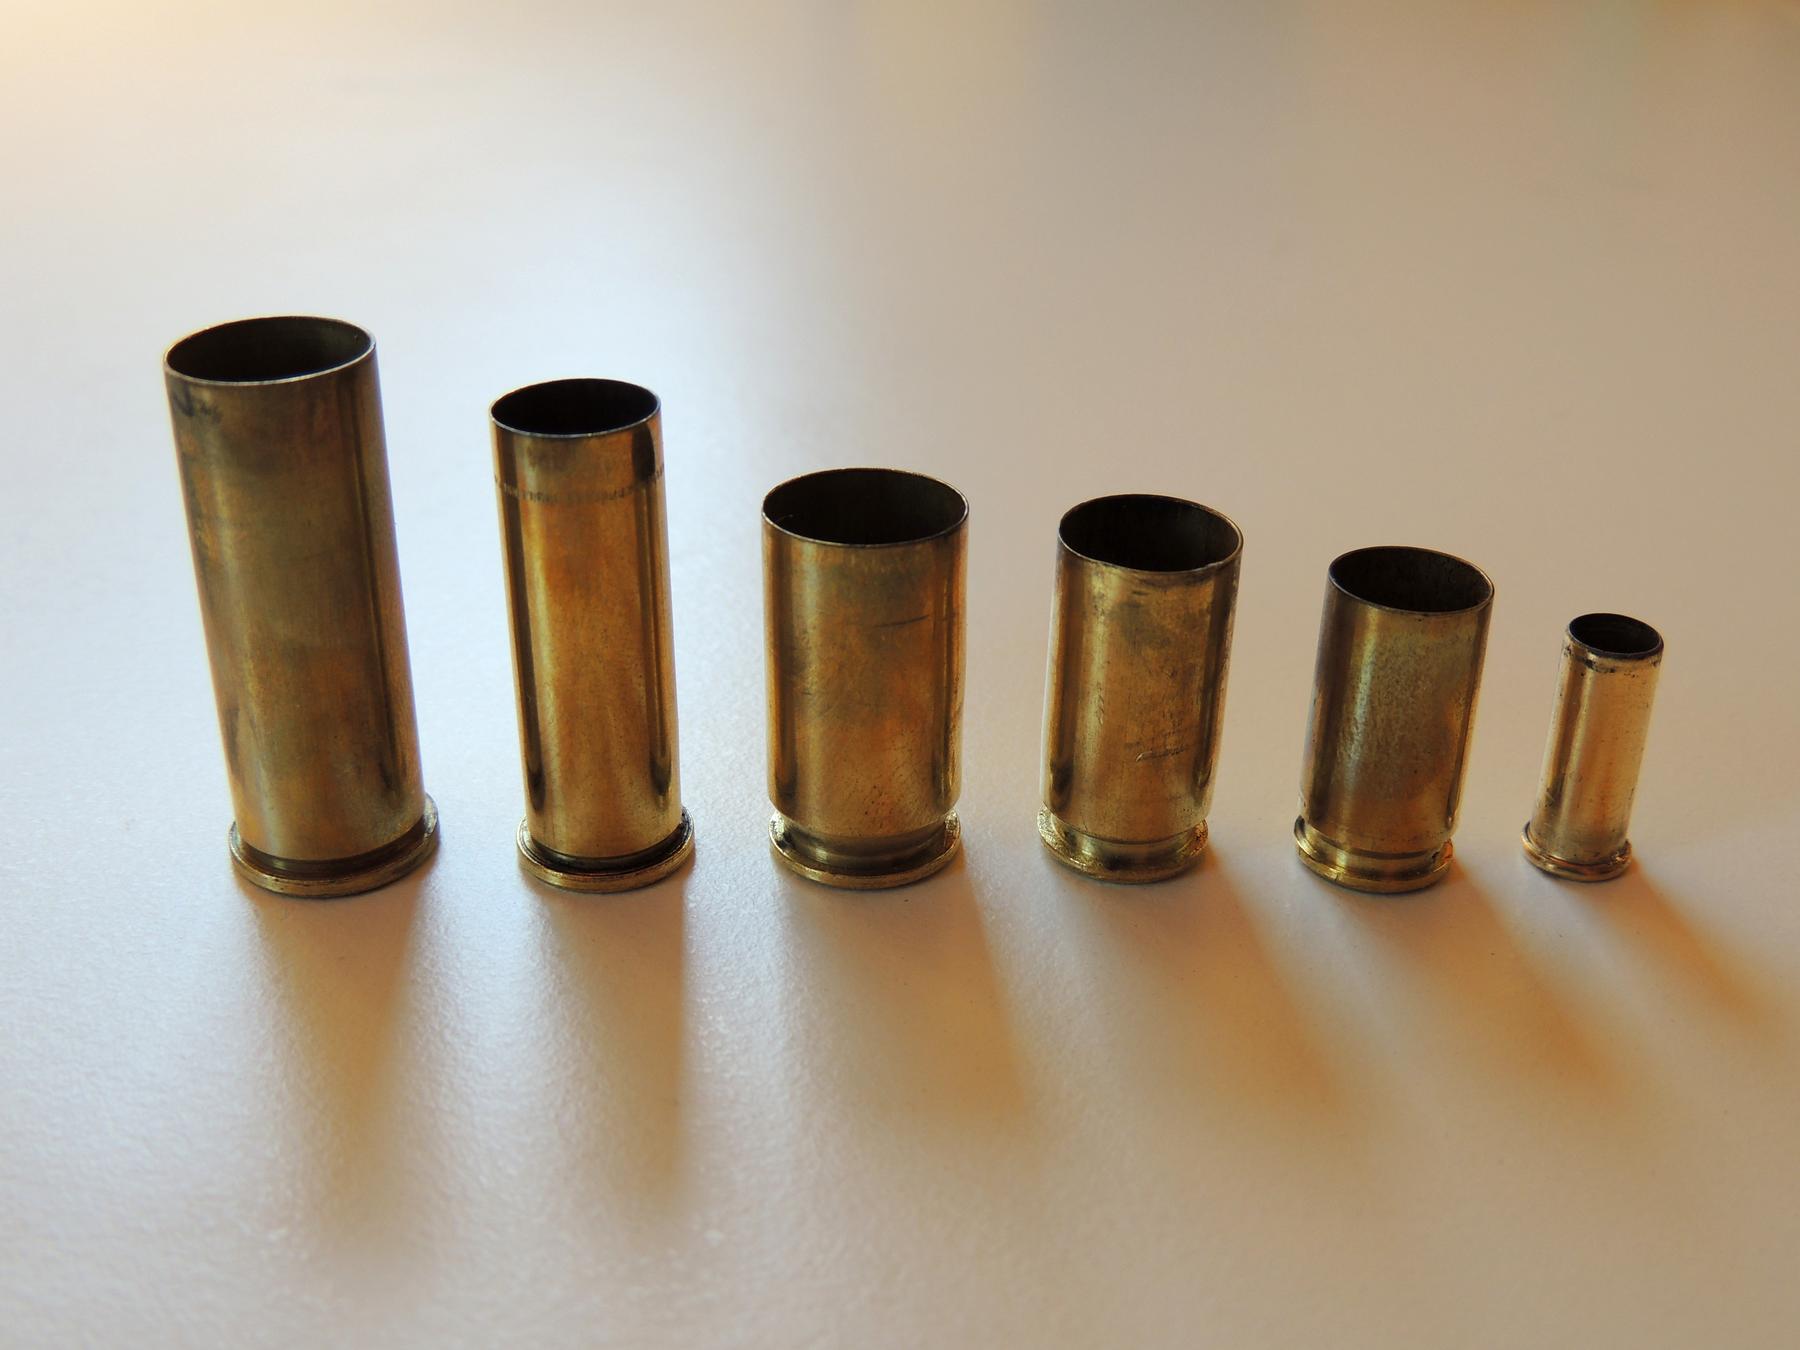 Image of 9mm Luger - File:Shell casing photo.JPG